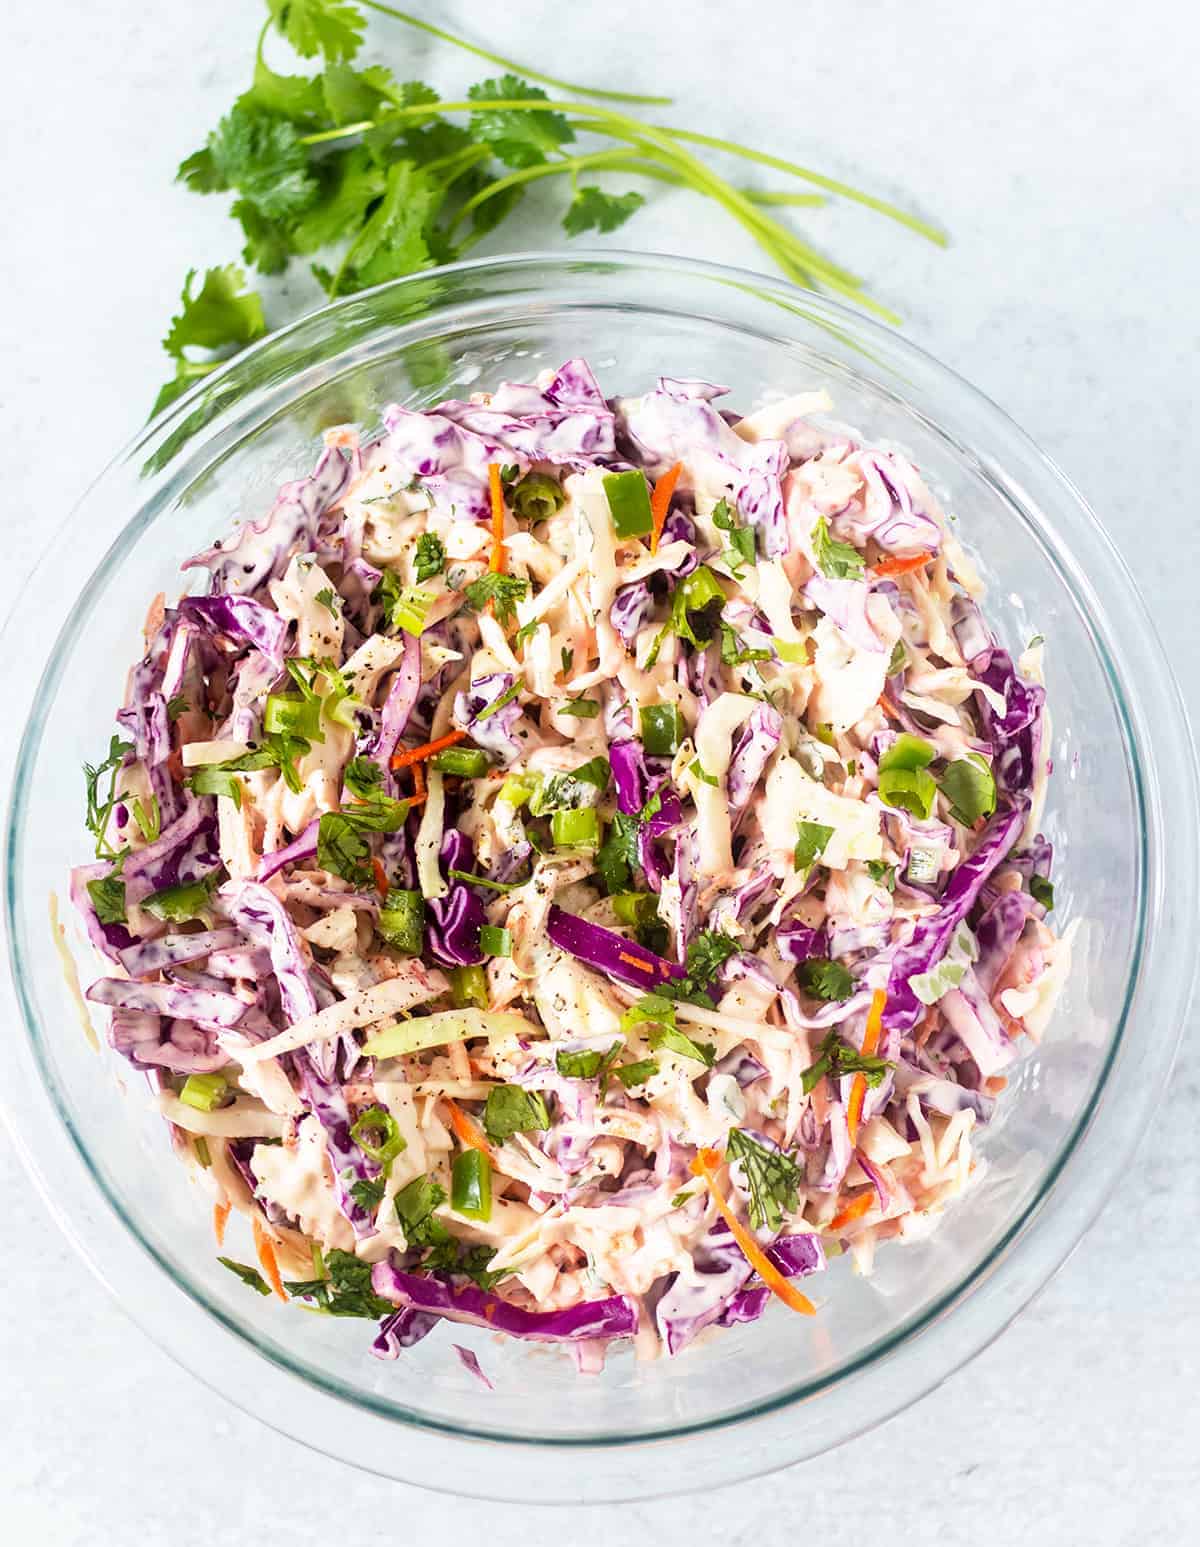 cilantro lime slaw in clear glass mixing bowl